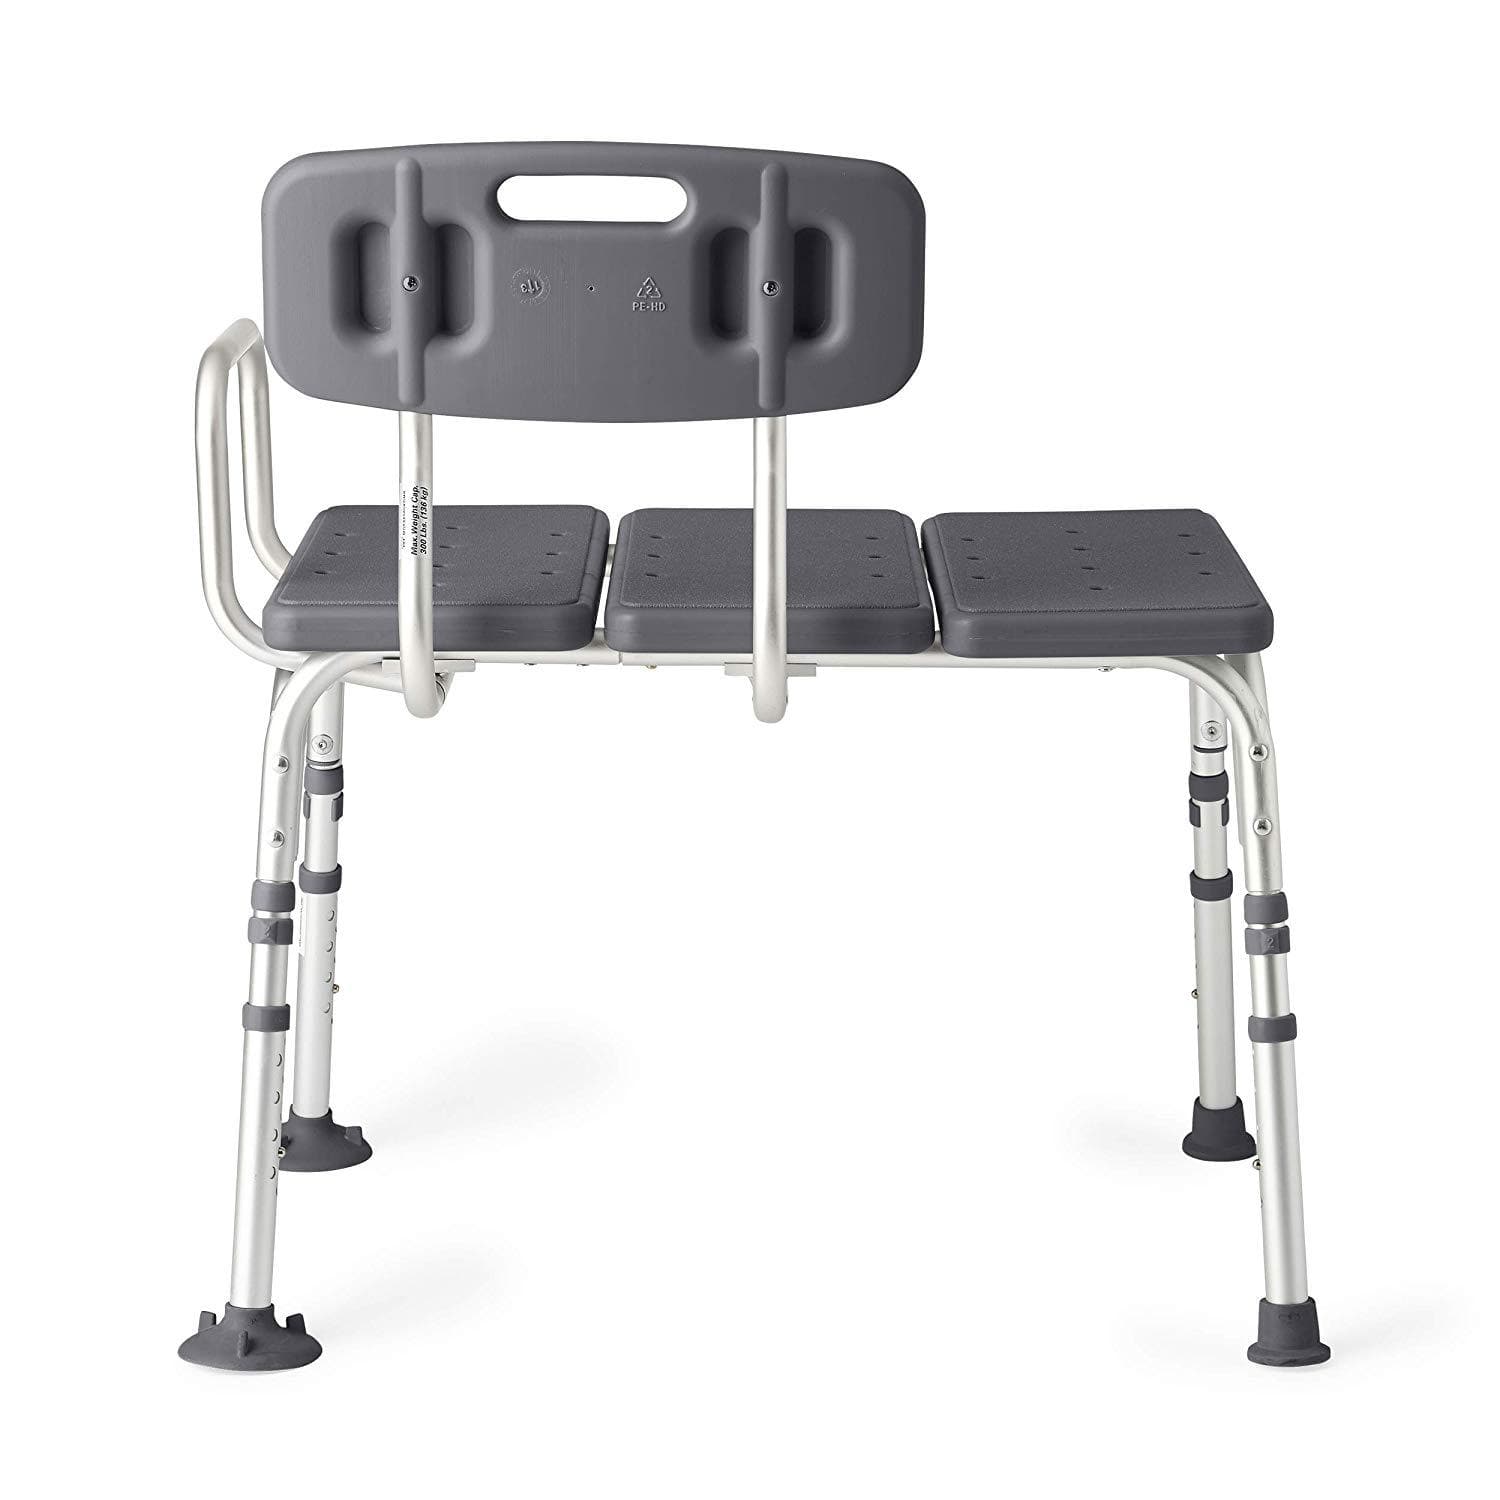 Medline Knockdown Transfer Bath Bench with Back and Microban Antimicrobial Protection - Senior.com Bath Benches & Seats